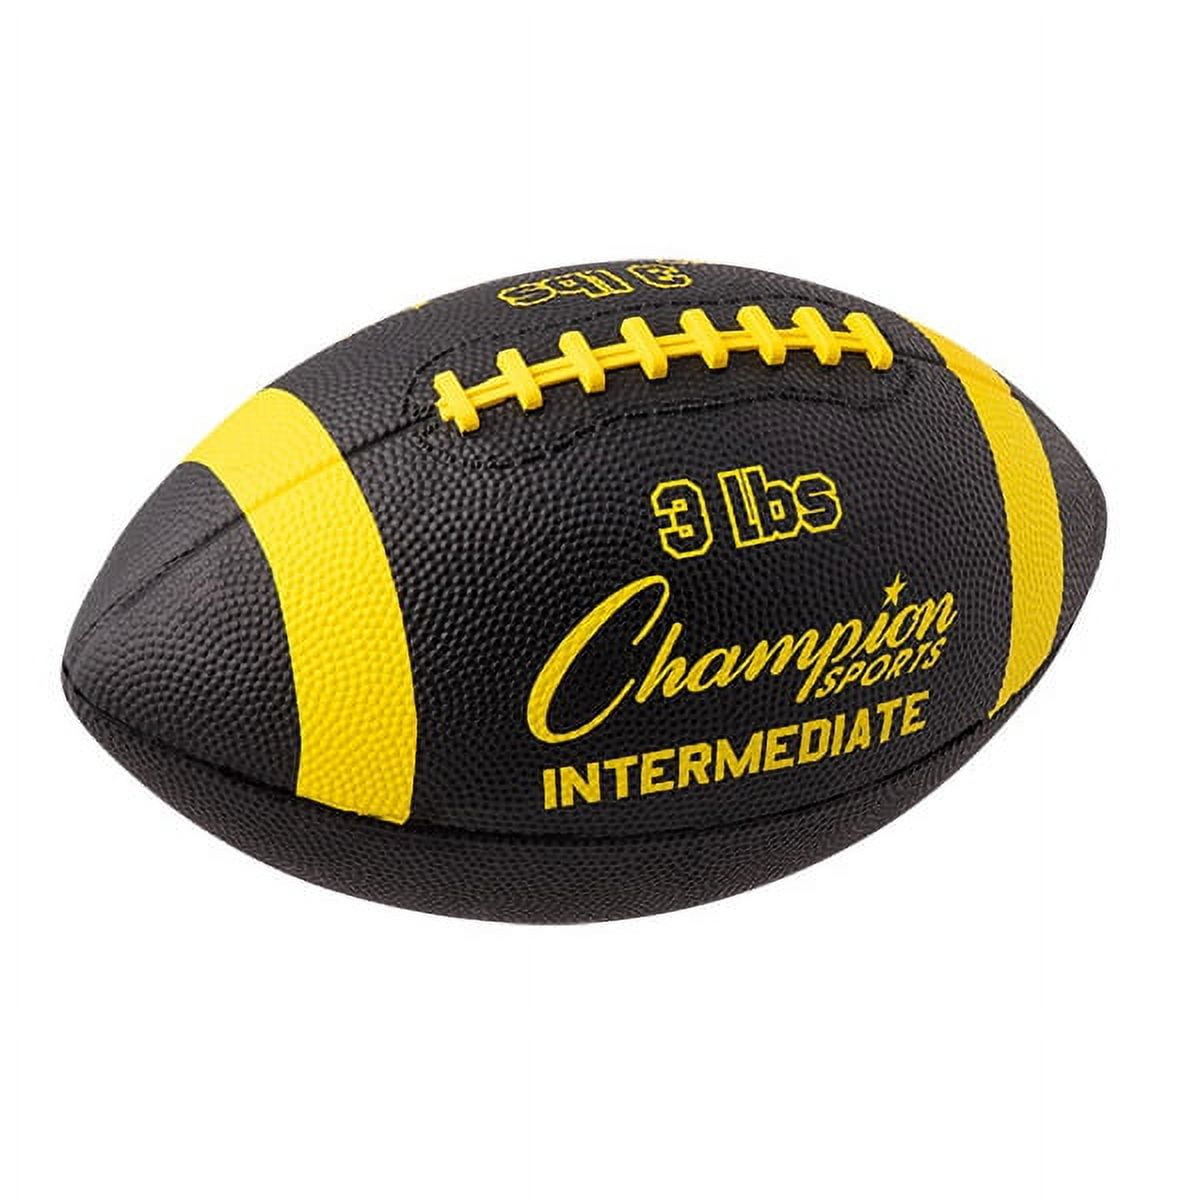 Picture of Champion Sports WF32 3 lbs Intermediate Size Football Trainer, Blue & Yellow